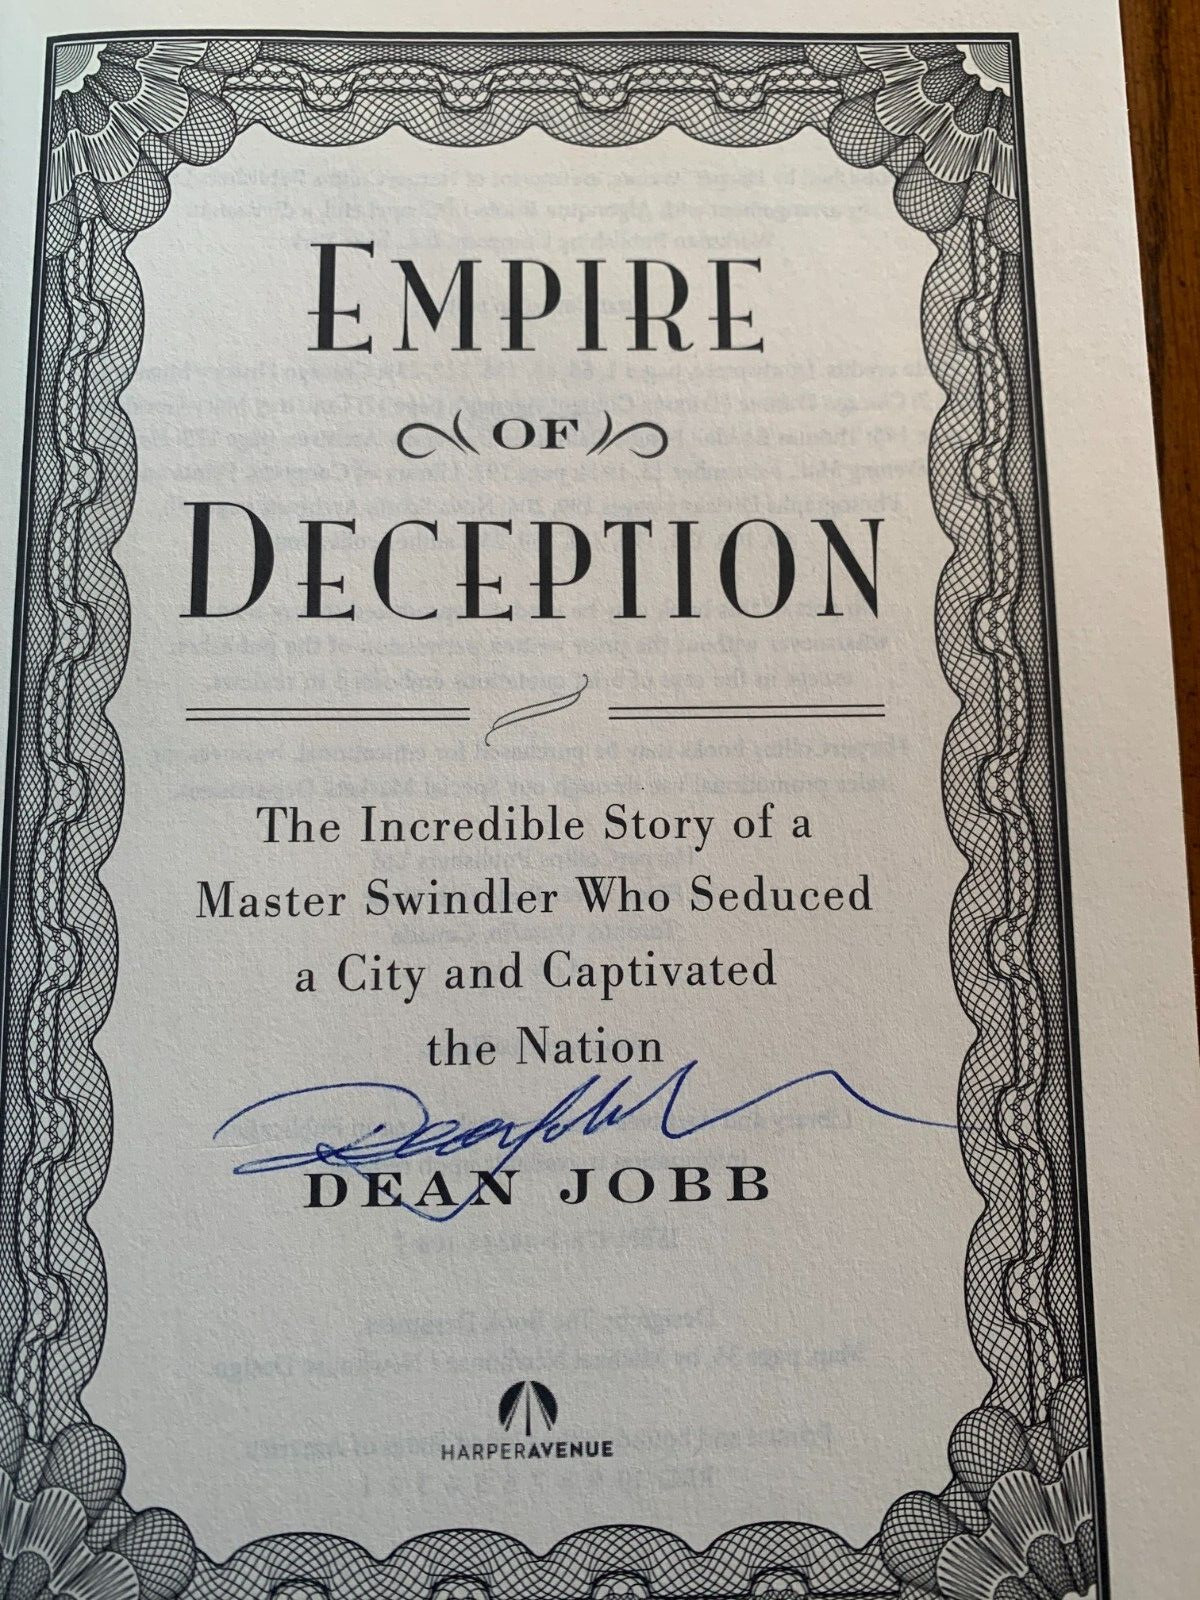 The Empire Of Deception From Chicago to Nova Scotia HC2015 Signed 1st Edition